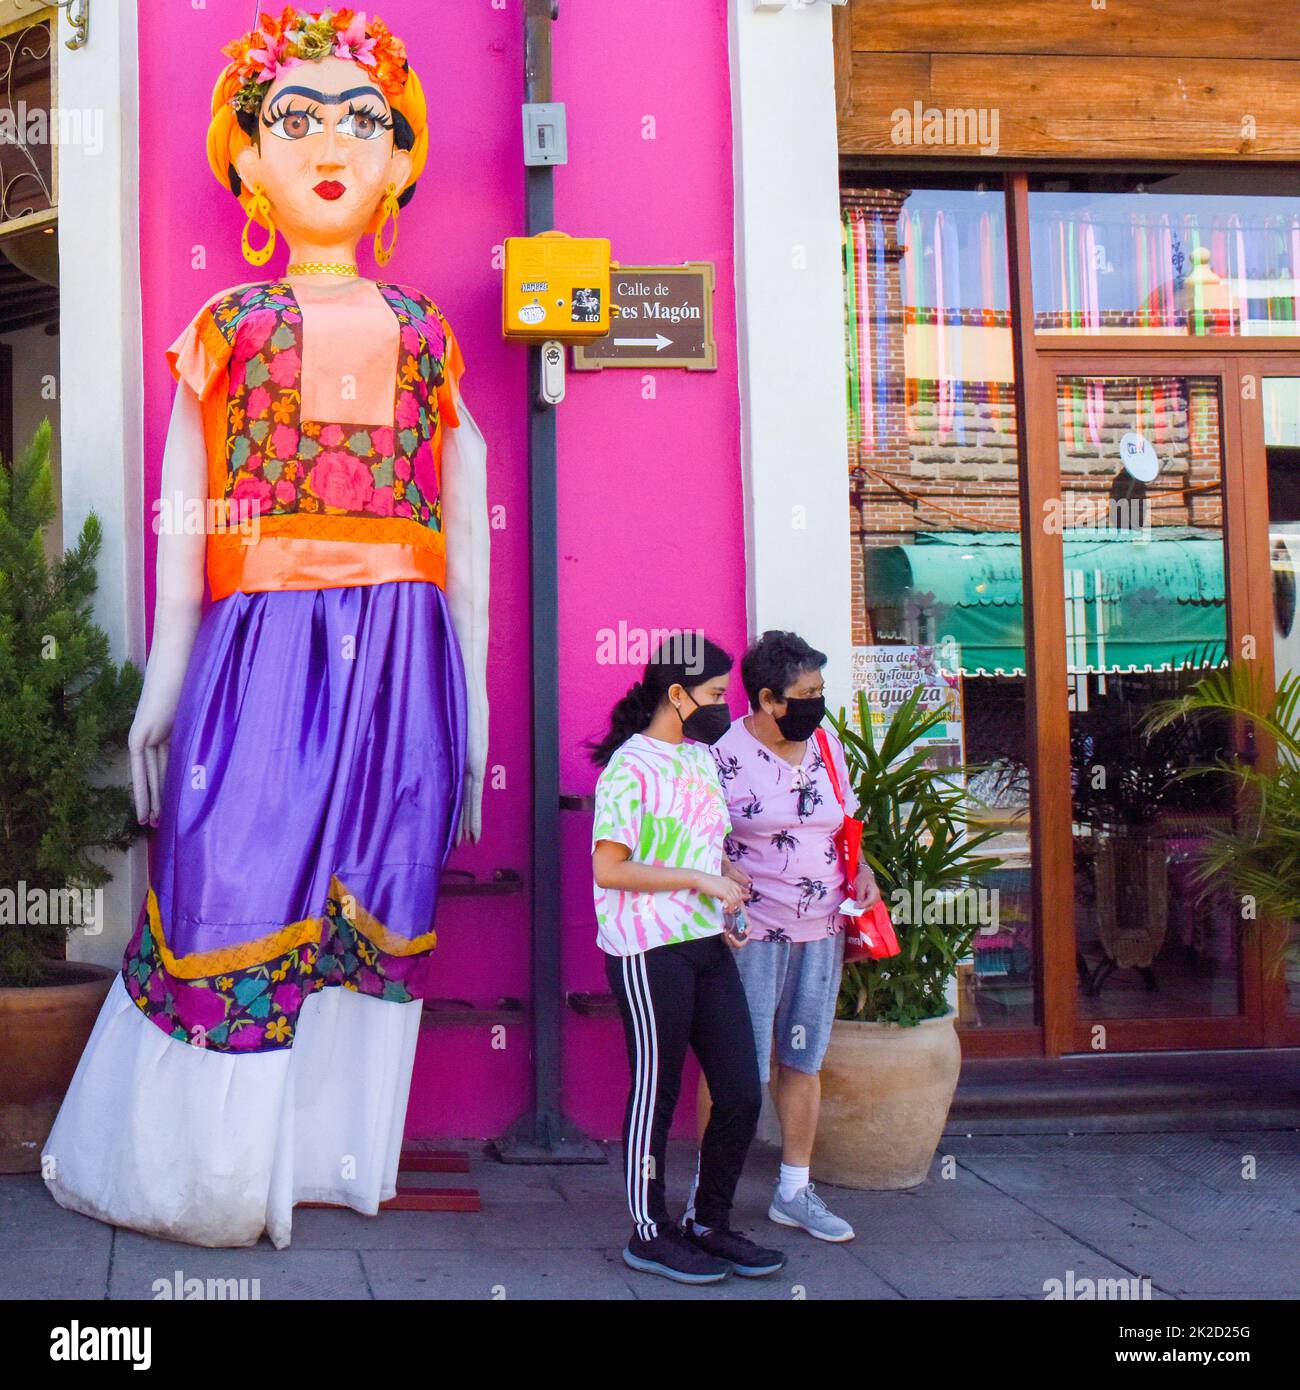 People wearing face masks and a Papier mache giant doll,downtown Oaxaca city, Mexico Stock Photo